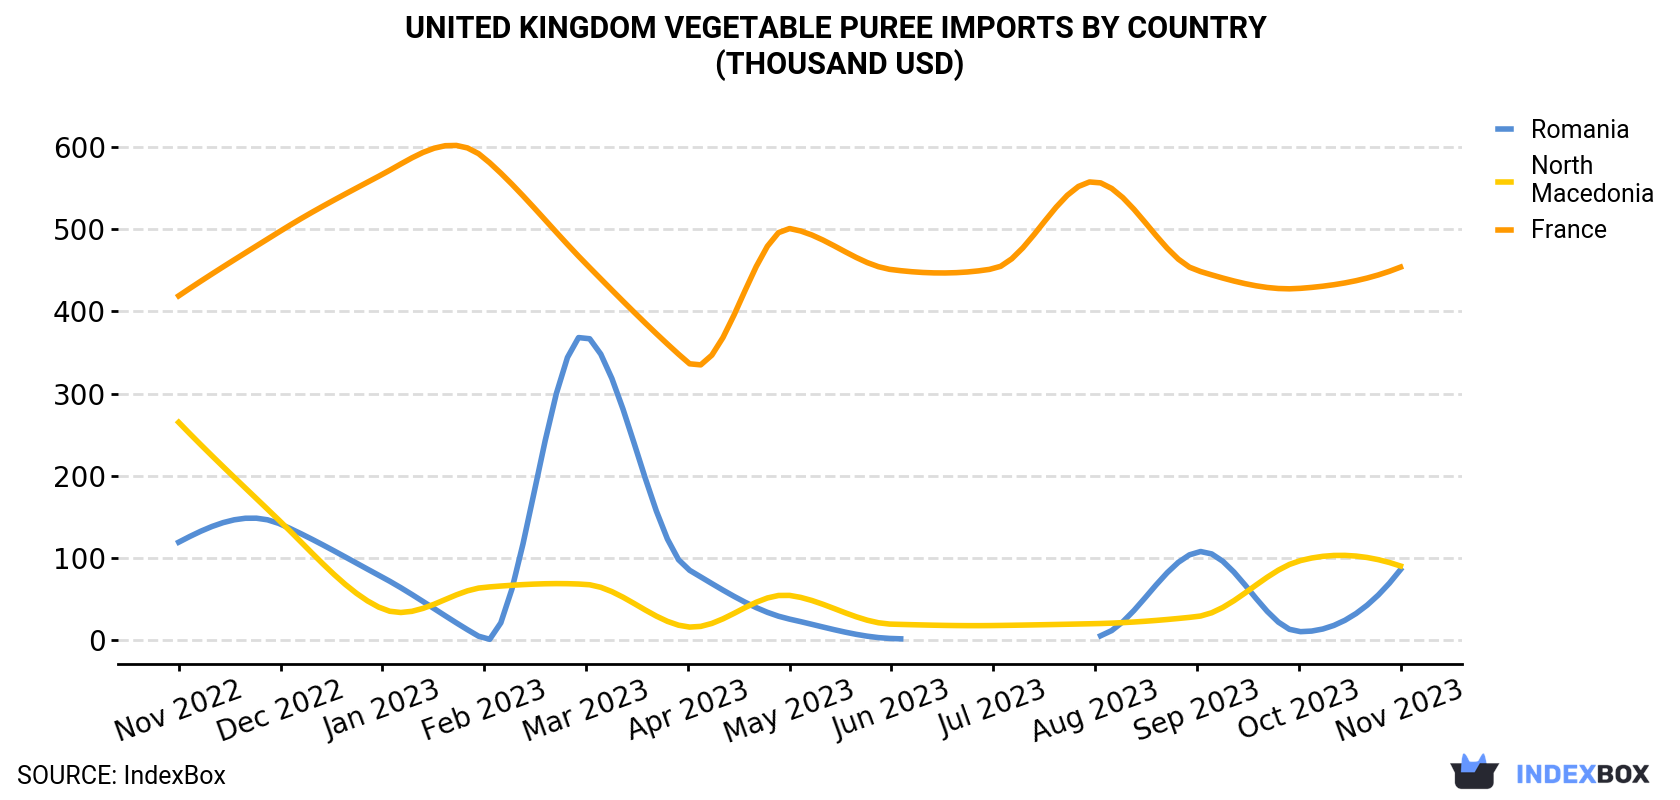 United Kingdom Vegetable Puree Imports By Country (Thousand USD)